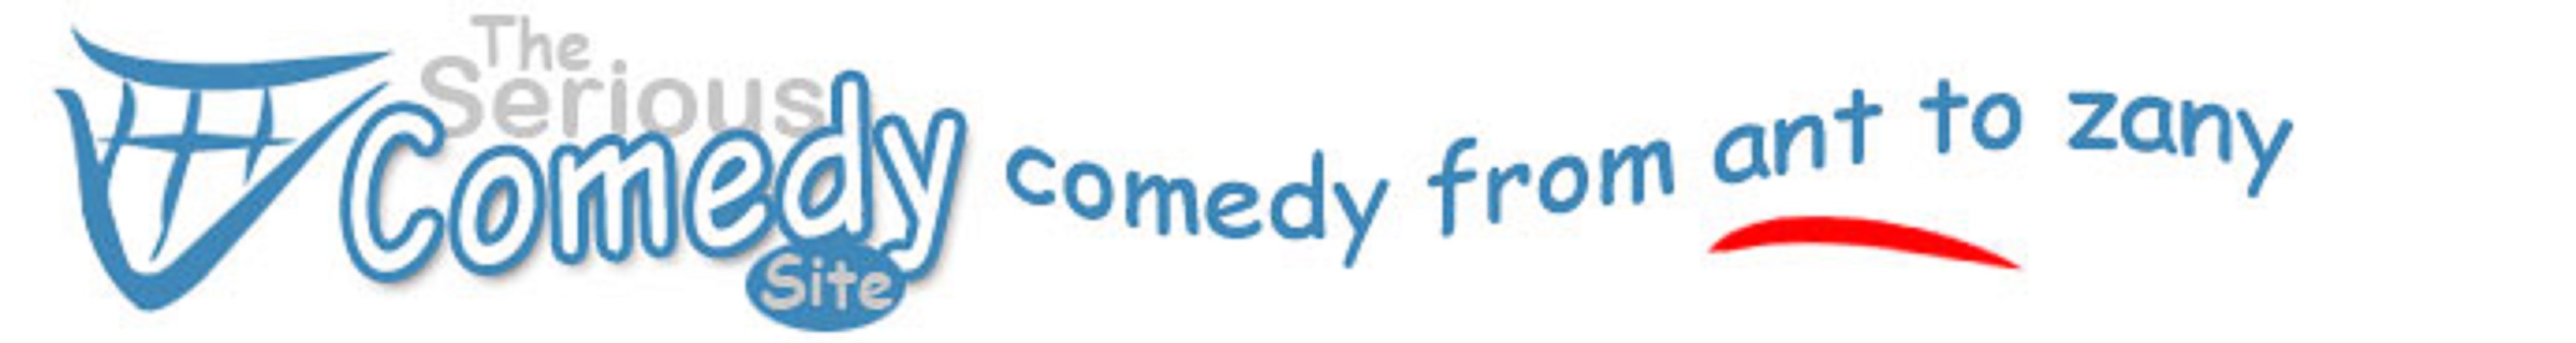 The Serious Comedy Site